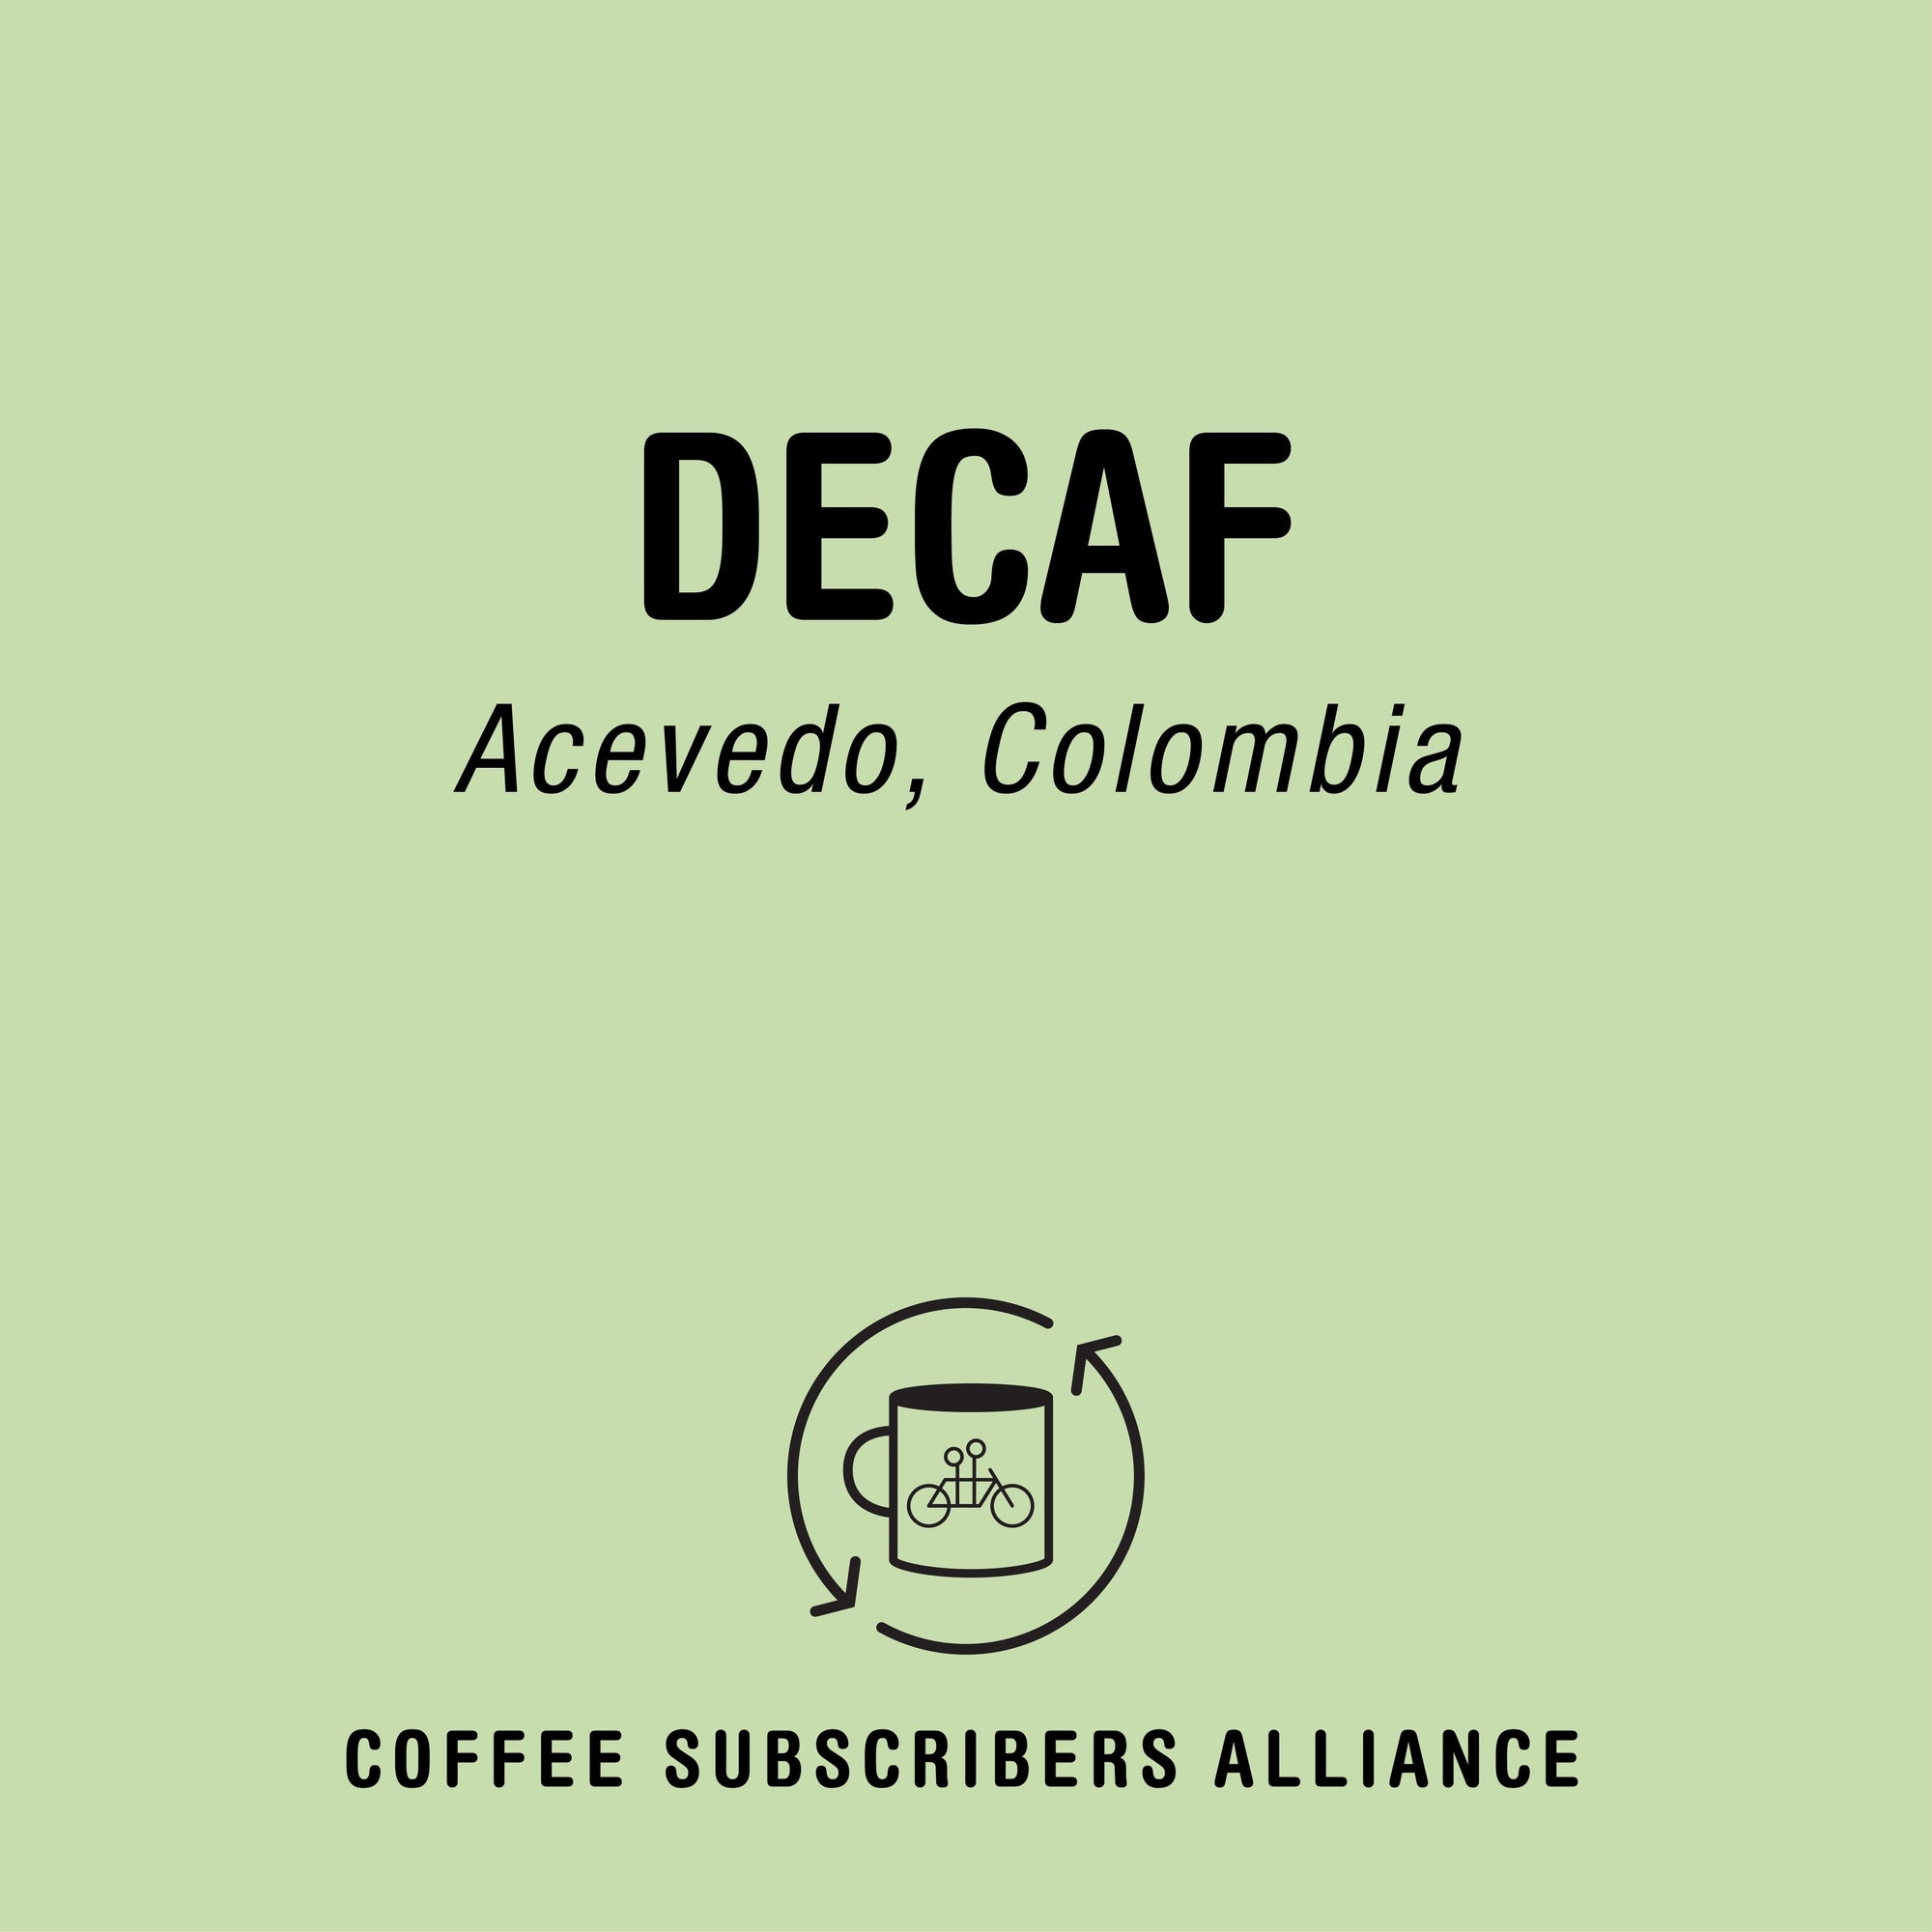 Logo for Tandem decaf subscription featuring text "decaf acevedo, colombia" with a stylized coffee cup encircled by a bicycle chain, set against a solid light green background.